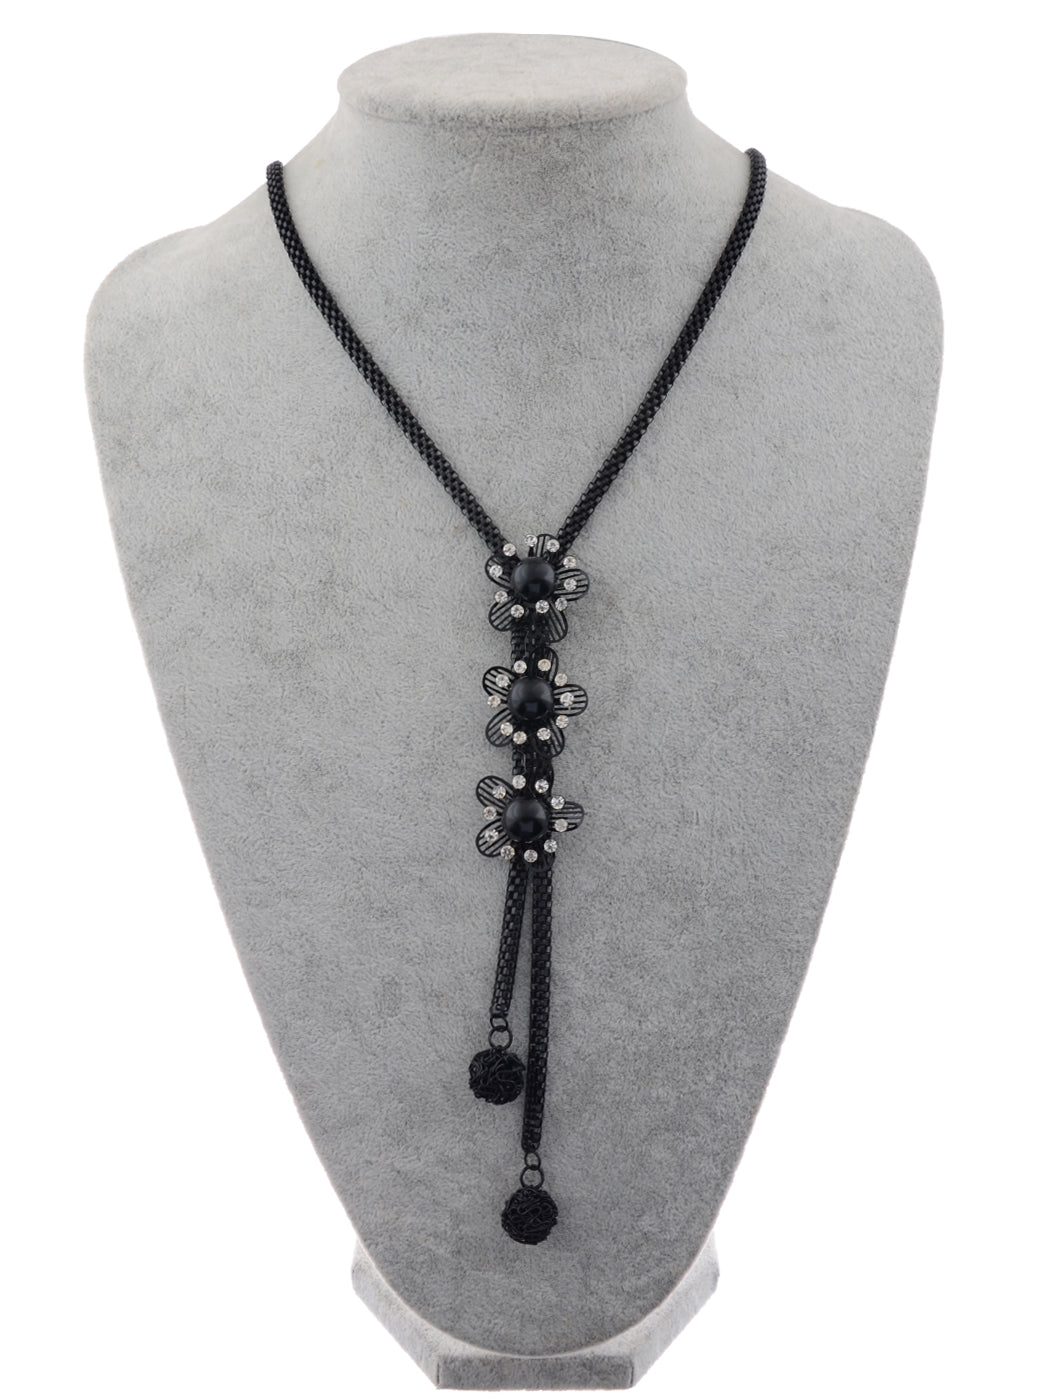 Dangling Black Cut Out Flower Trio Jewelry Necklace